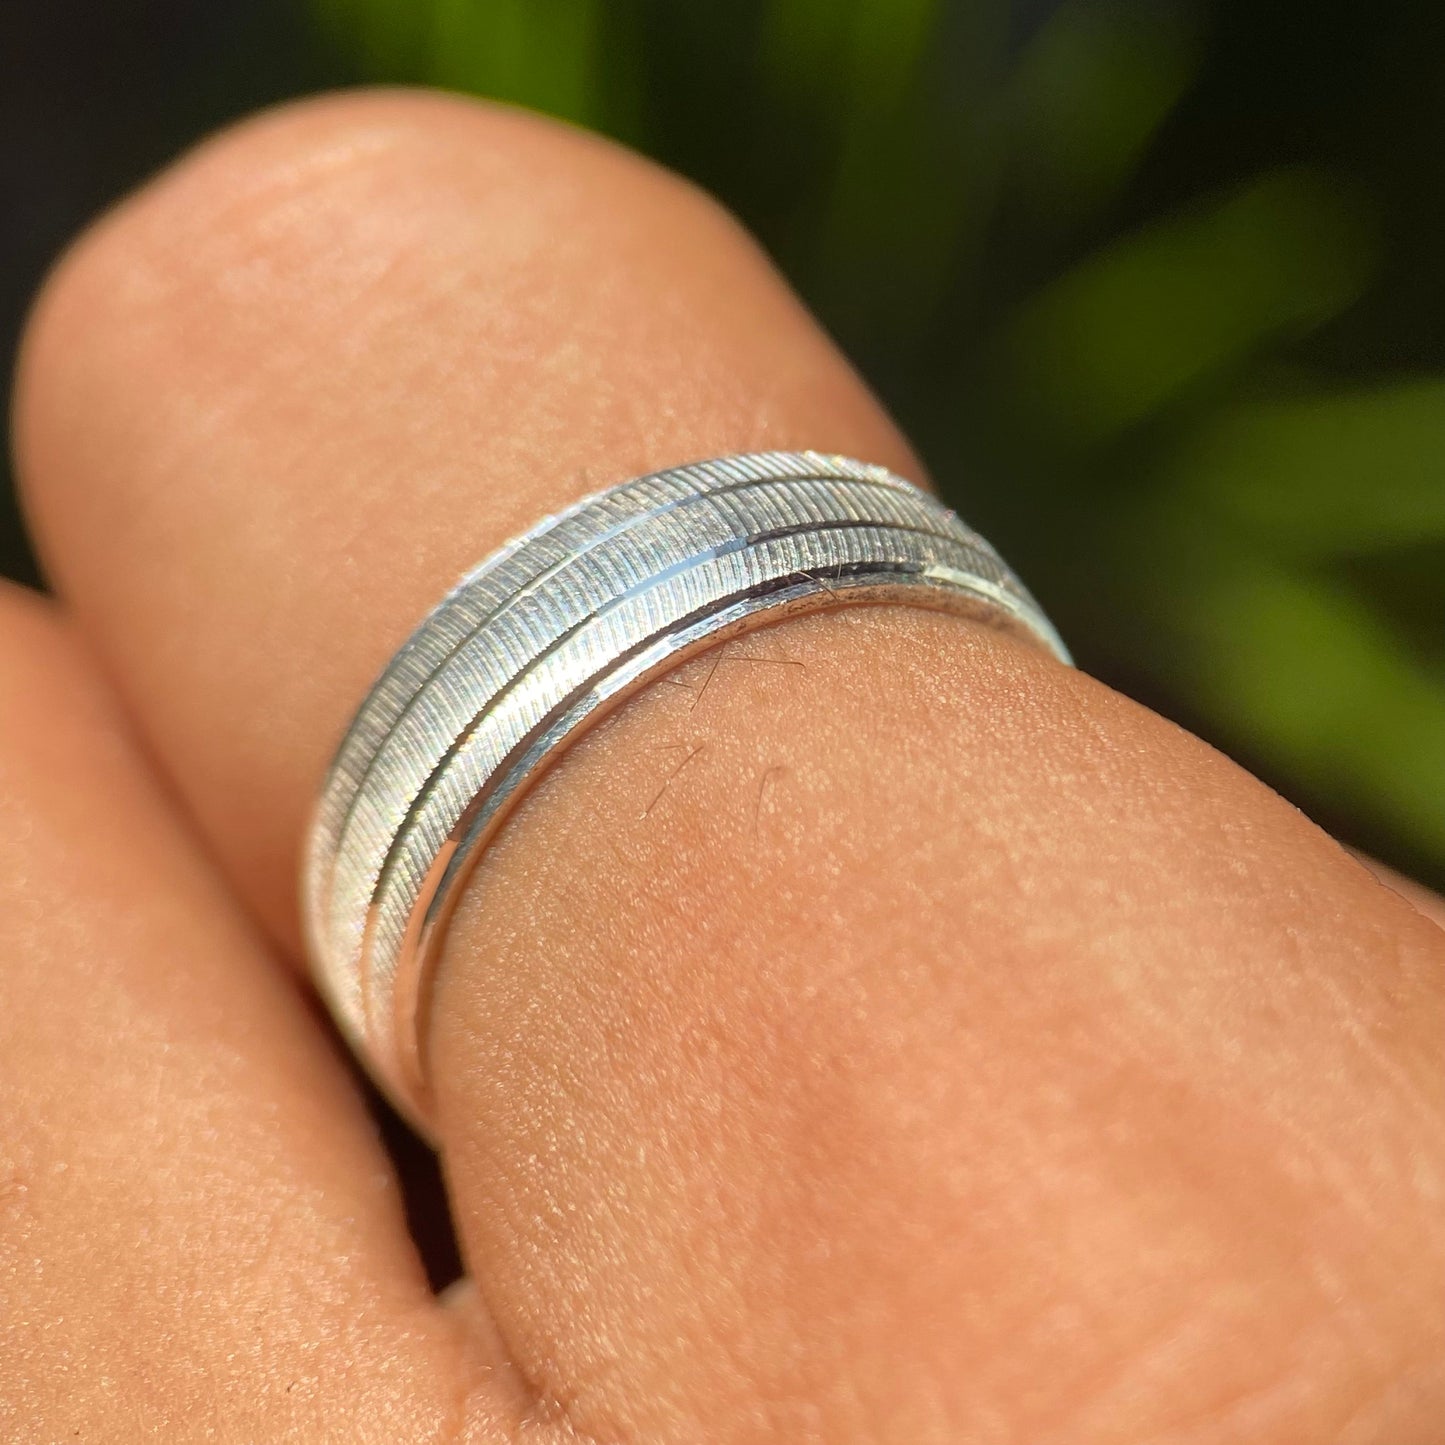 Ethan Diamond Ring in Silver 